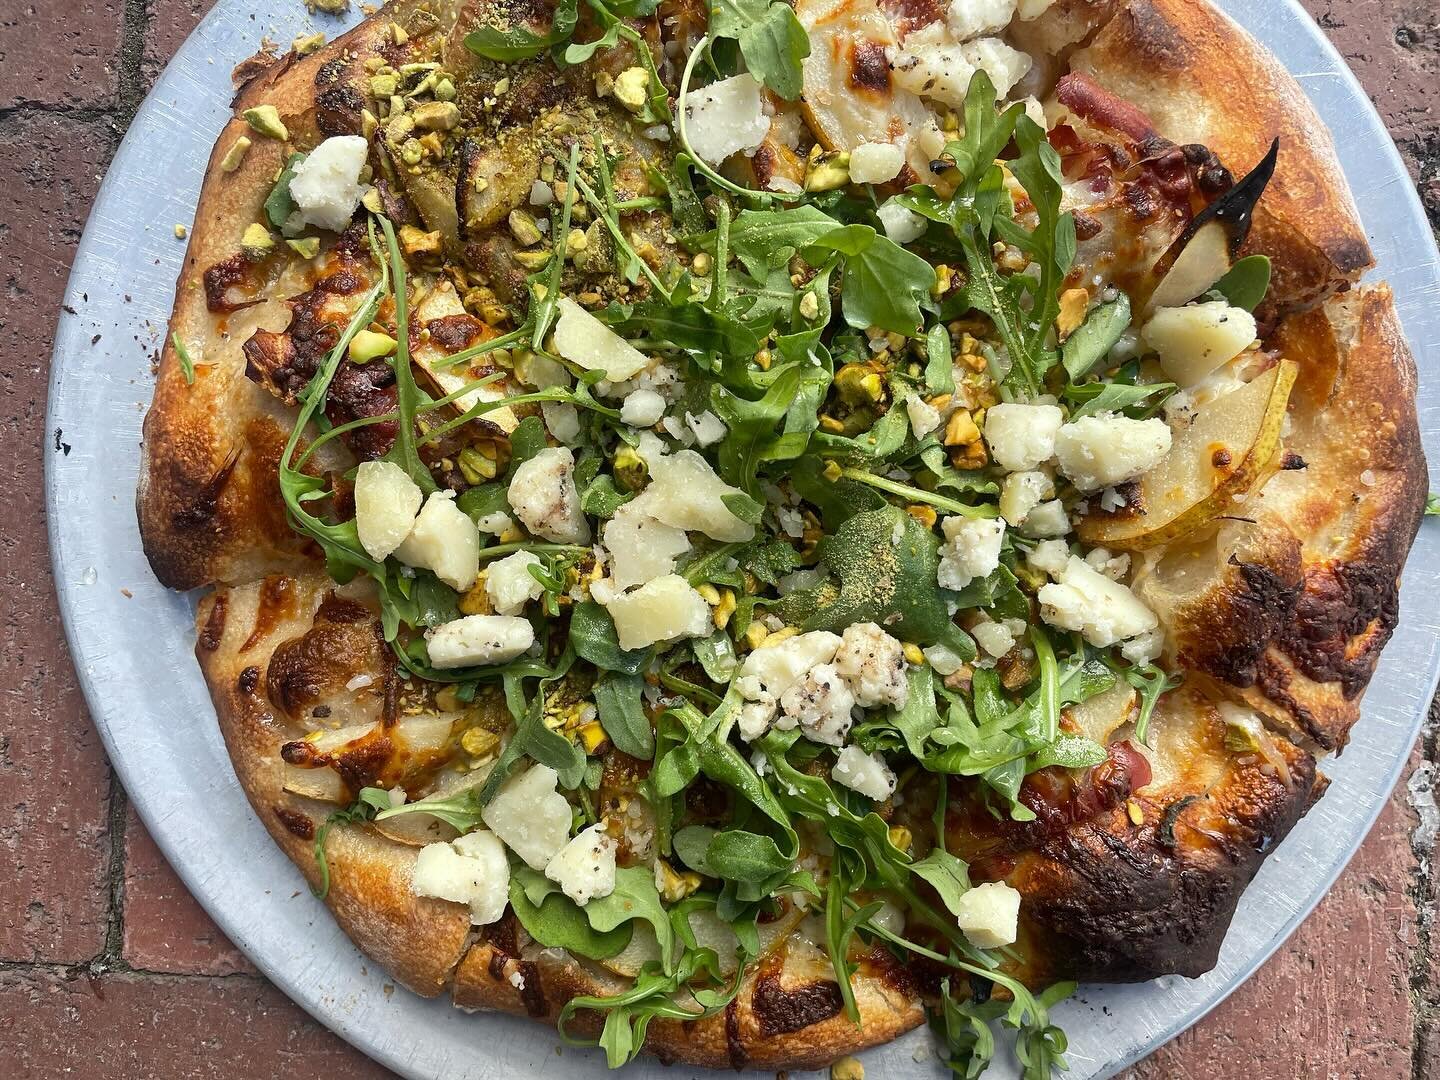 The Perfect Pear with EVOO, pears, prosciutto, caramelized onions, mozzarella, arugula, toasted pistachios, truffles moliterno cheese, white balsamic reduction.